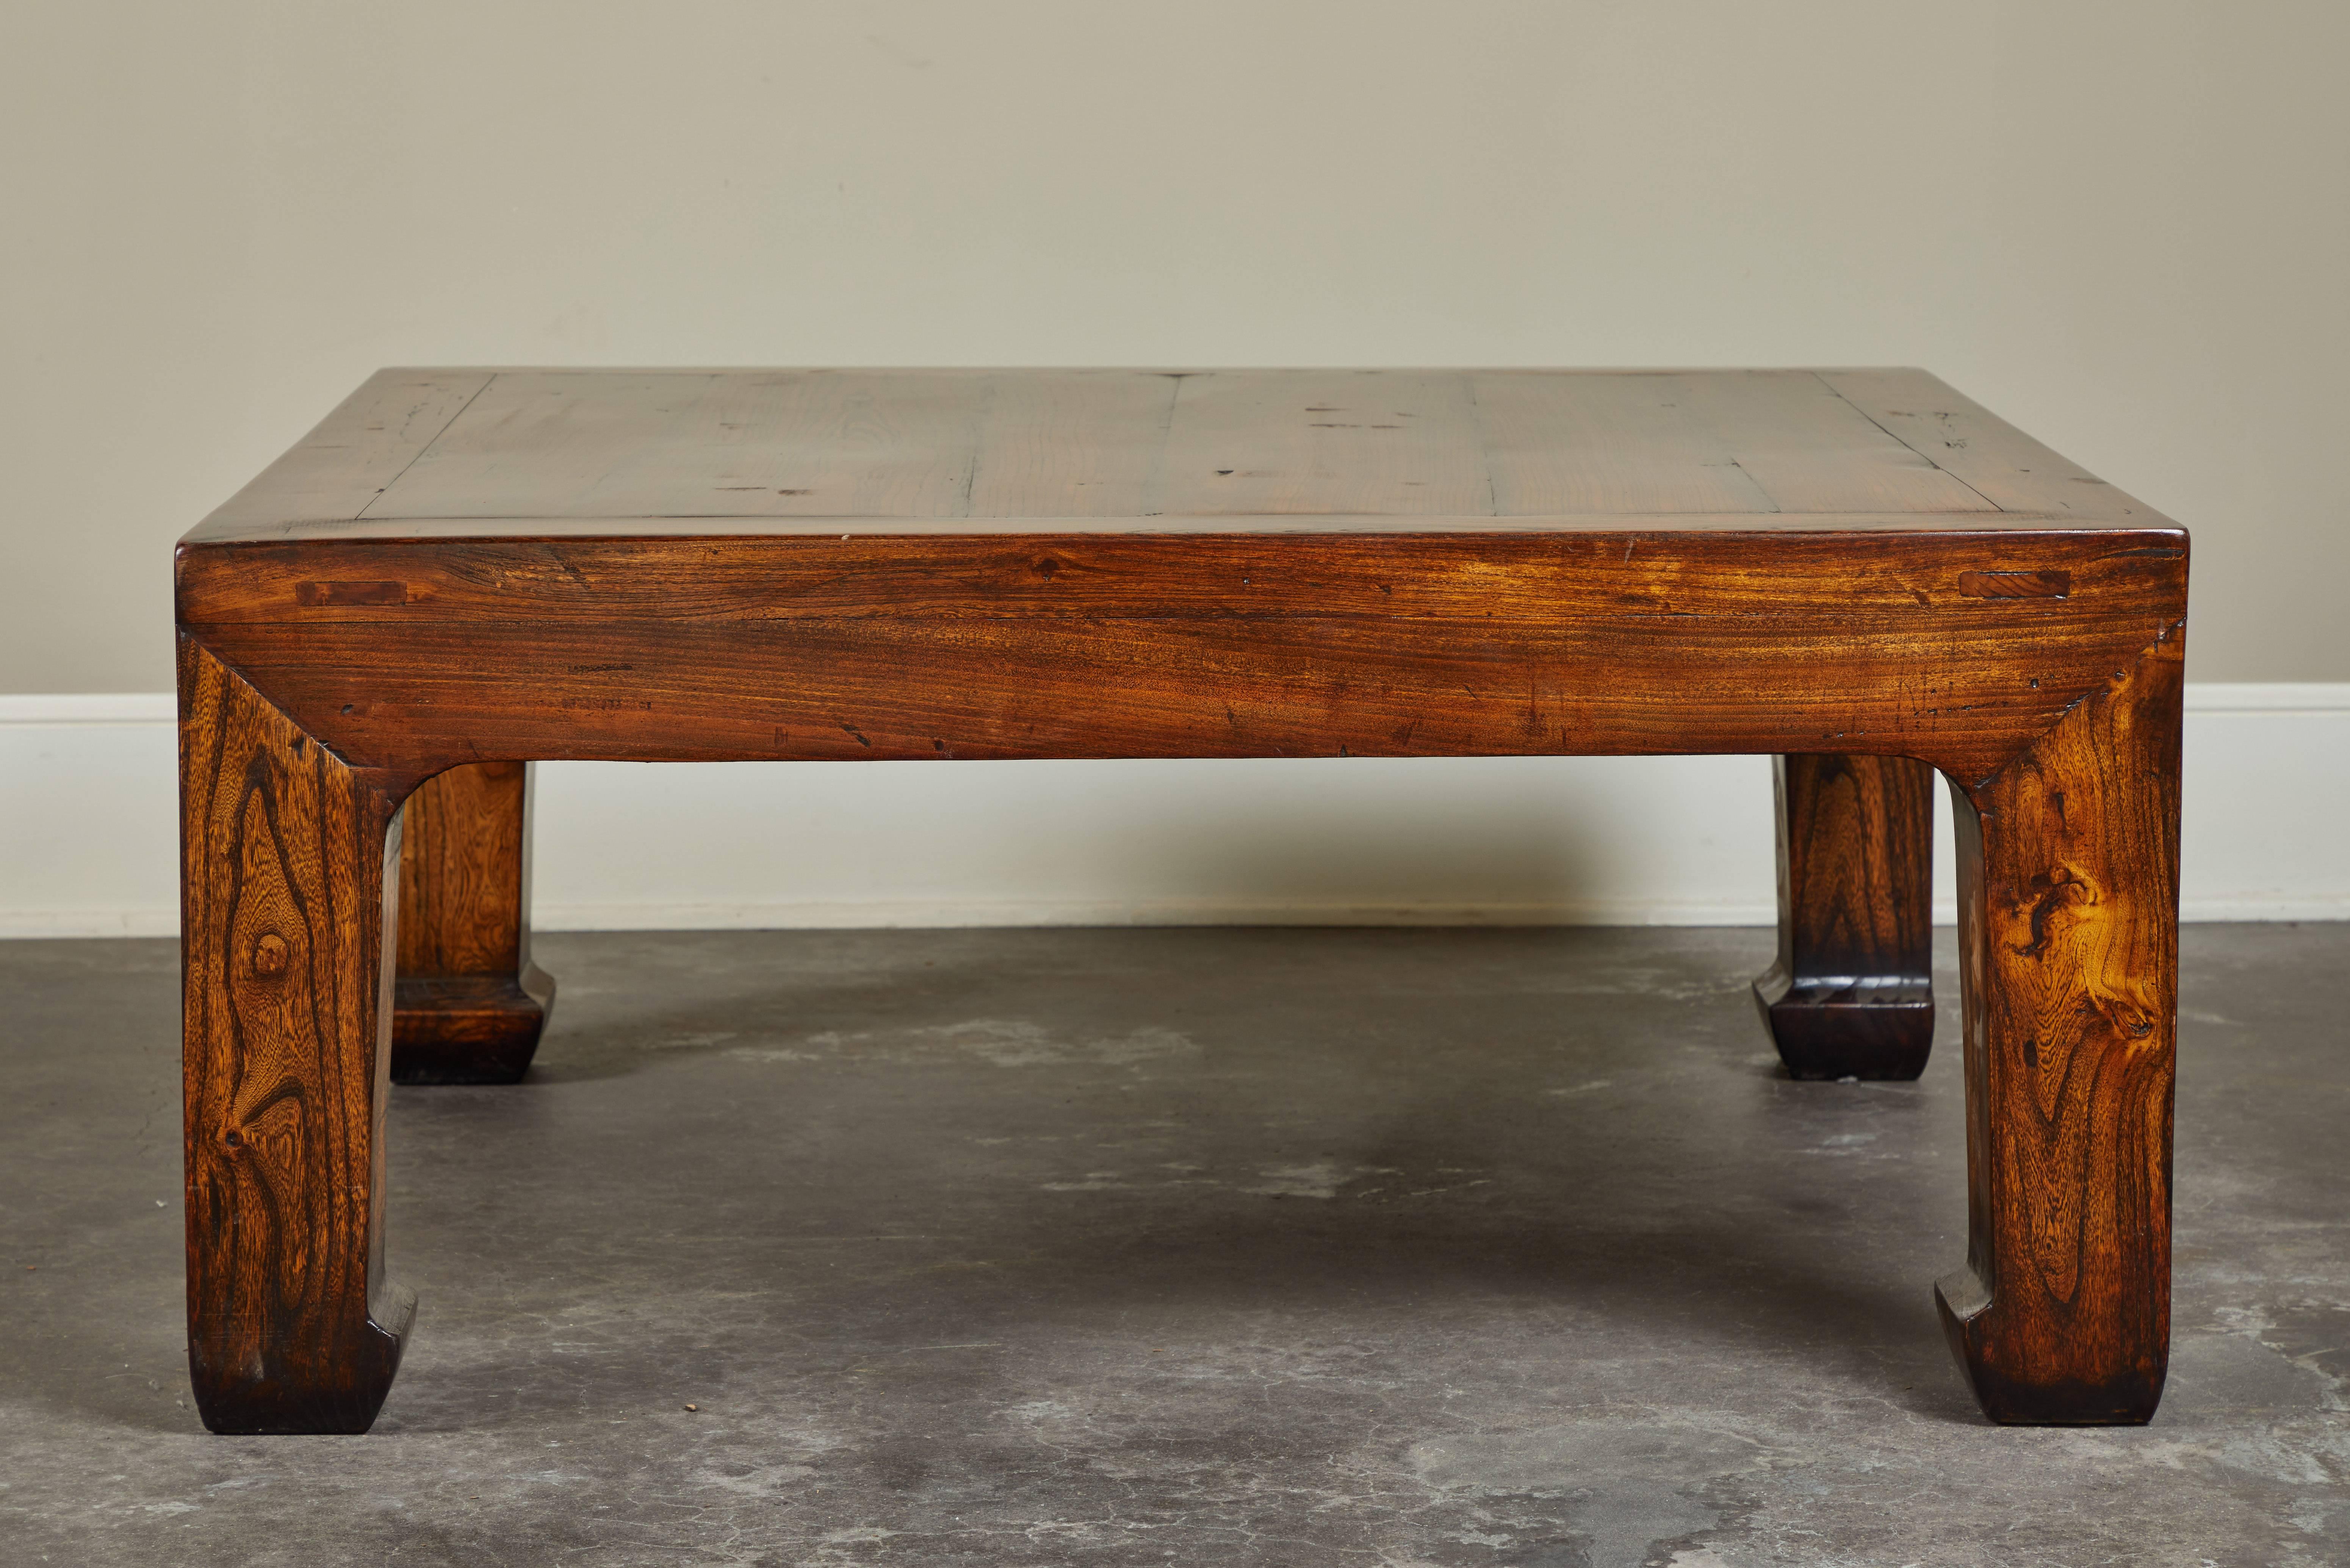 Chinese Export Chinese Elm Coffee Table For Sale